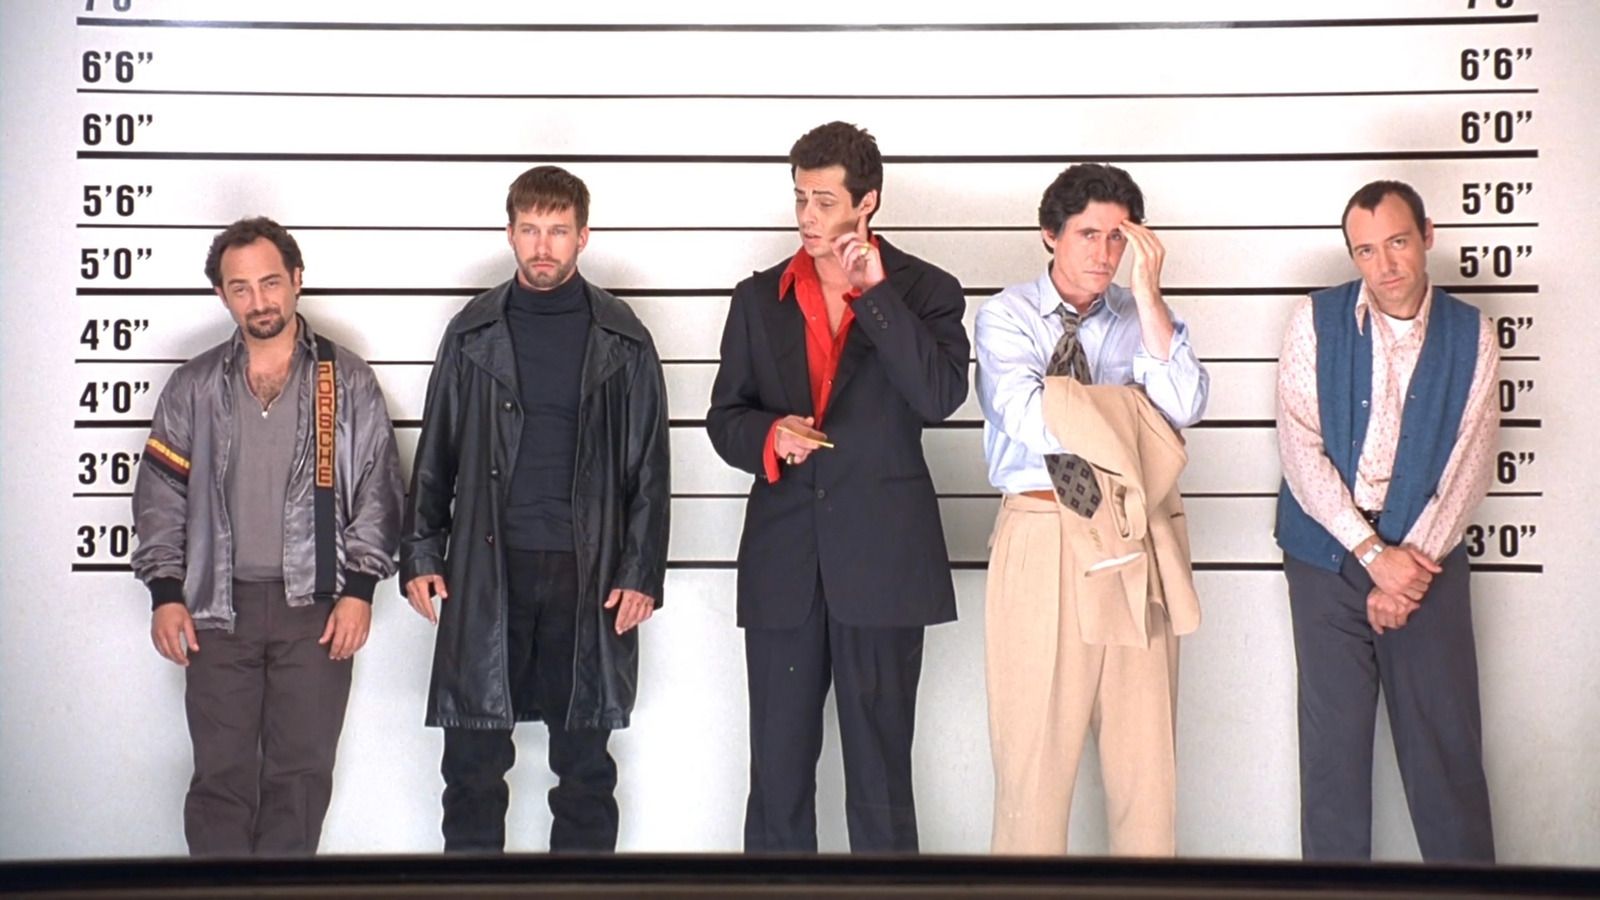 This Making-Of Doc on 'The Usual Suspects' Breaks the Keyser Söze Case Wide  Open